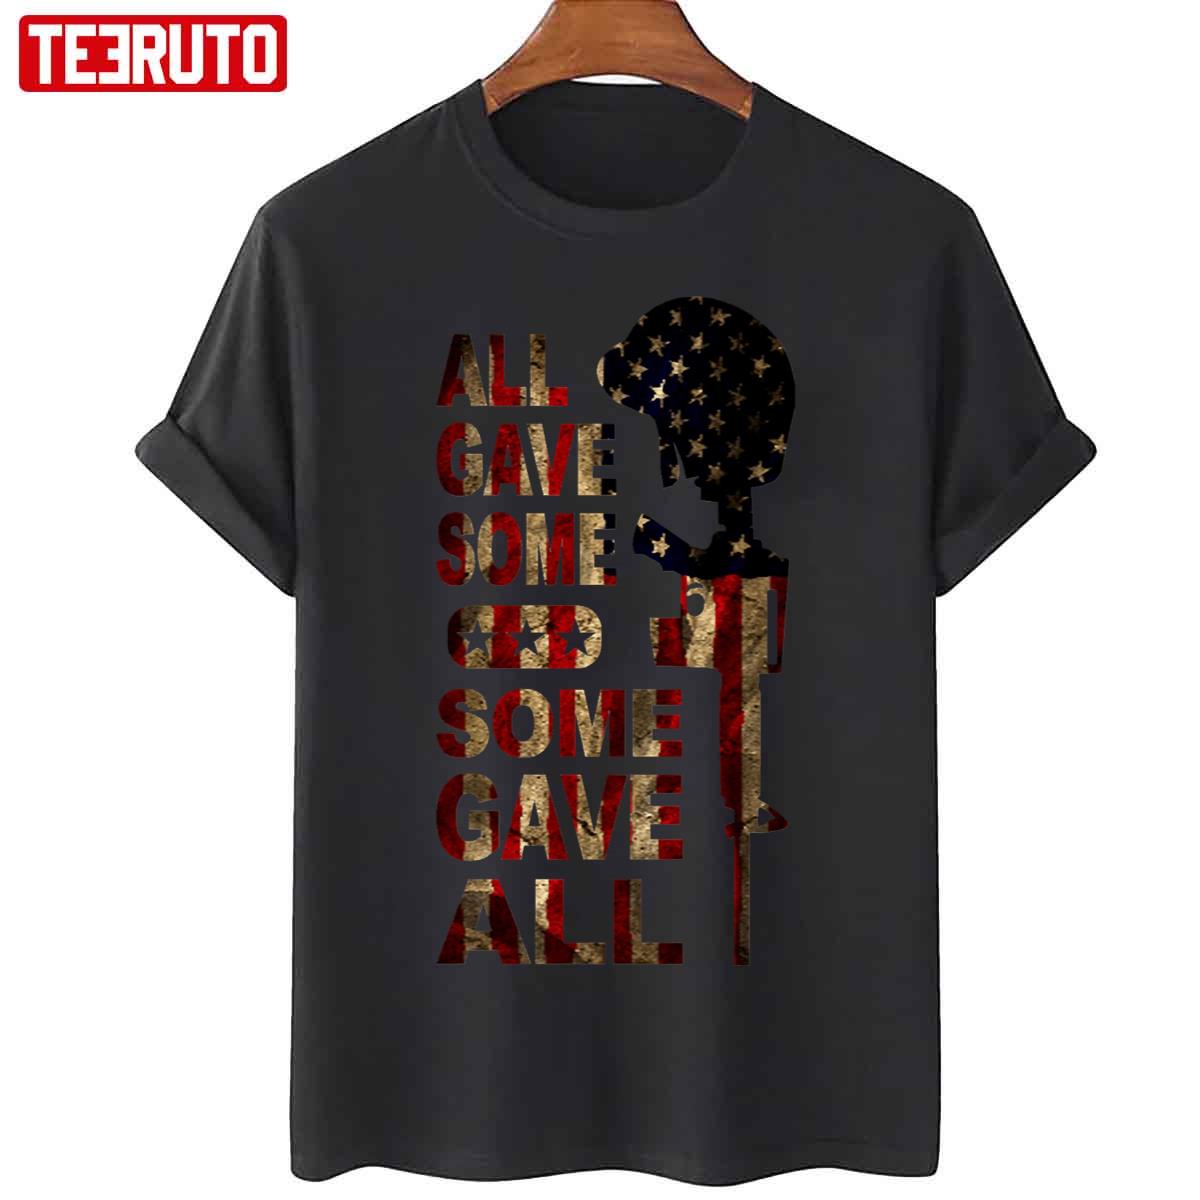 All Gave Some Some Gave All Unisex T-Shirt